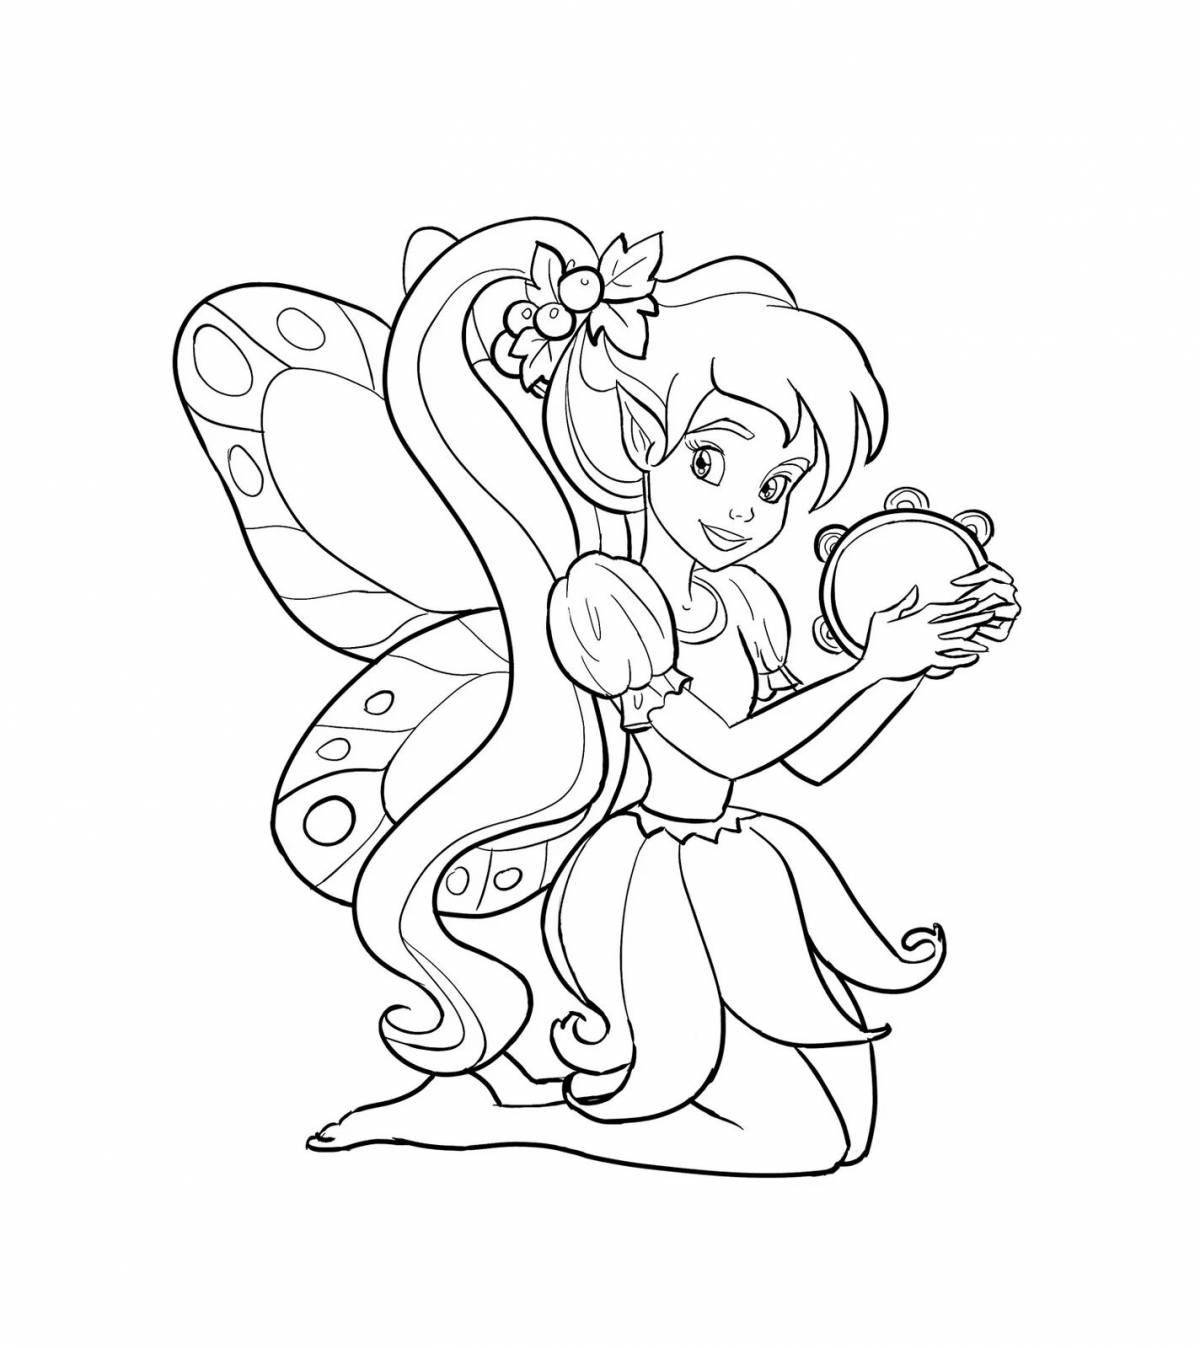 Sparkly fairy coloring pages for girls